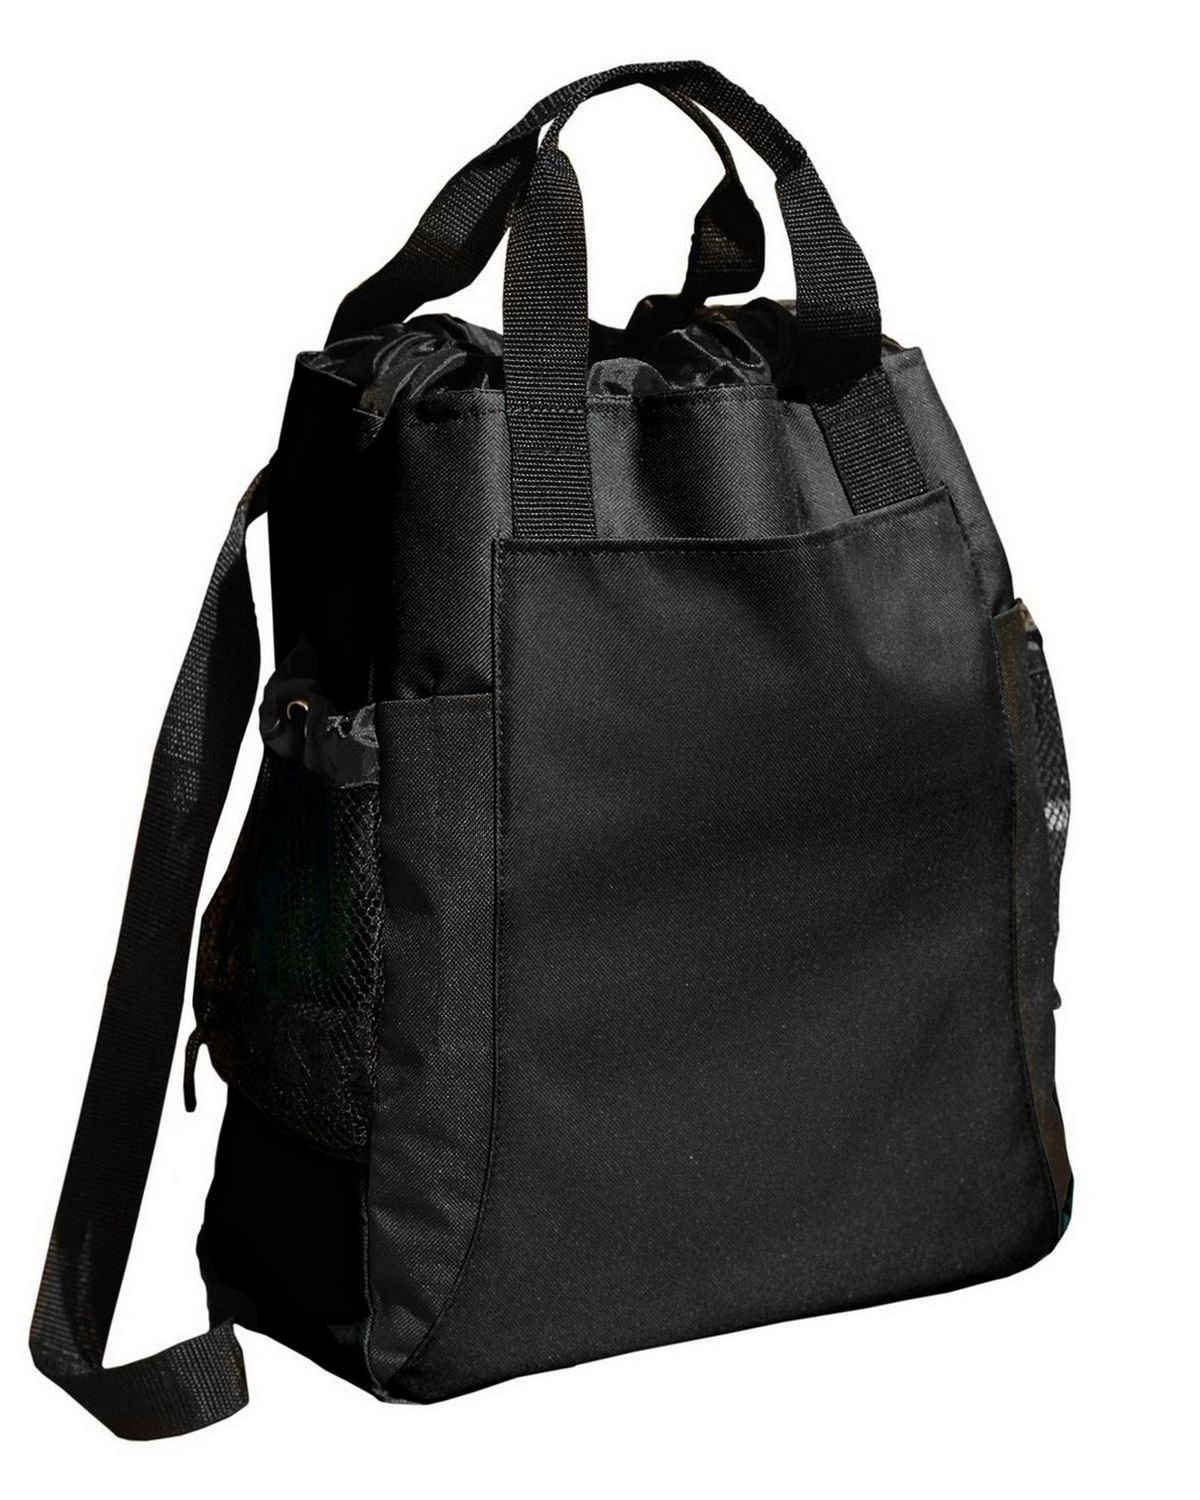 UltraClub 7291 Unisex Backpack Tote at Apparelstation